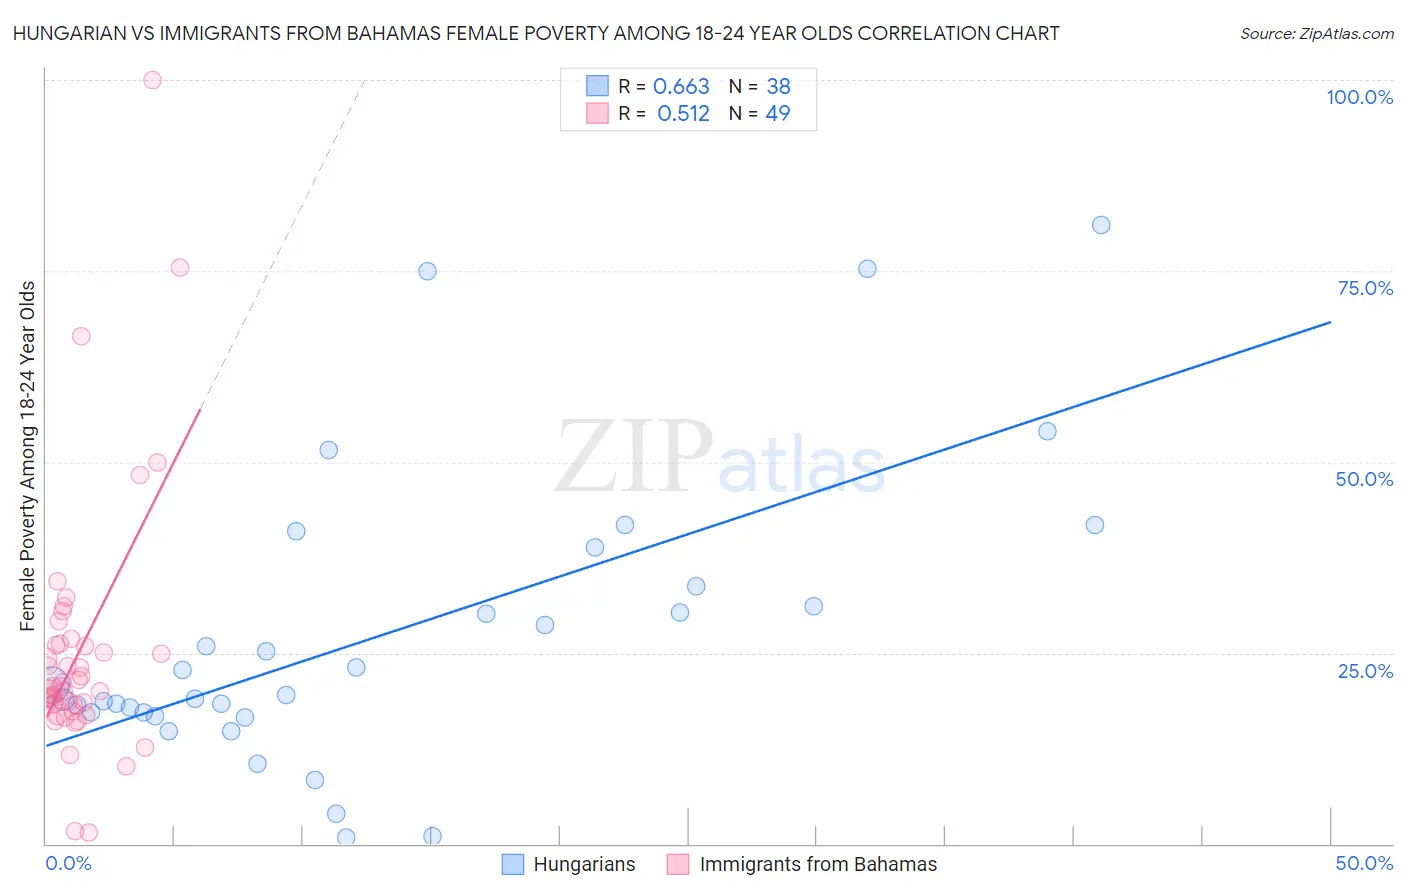 Hungarian vs Immigrants from Bahamas Female Poverty Among 18-24 Year Olds